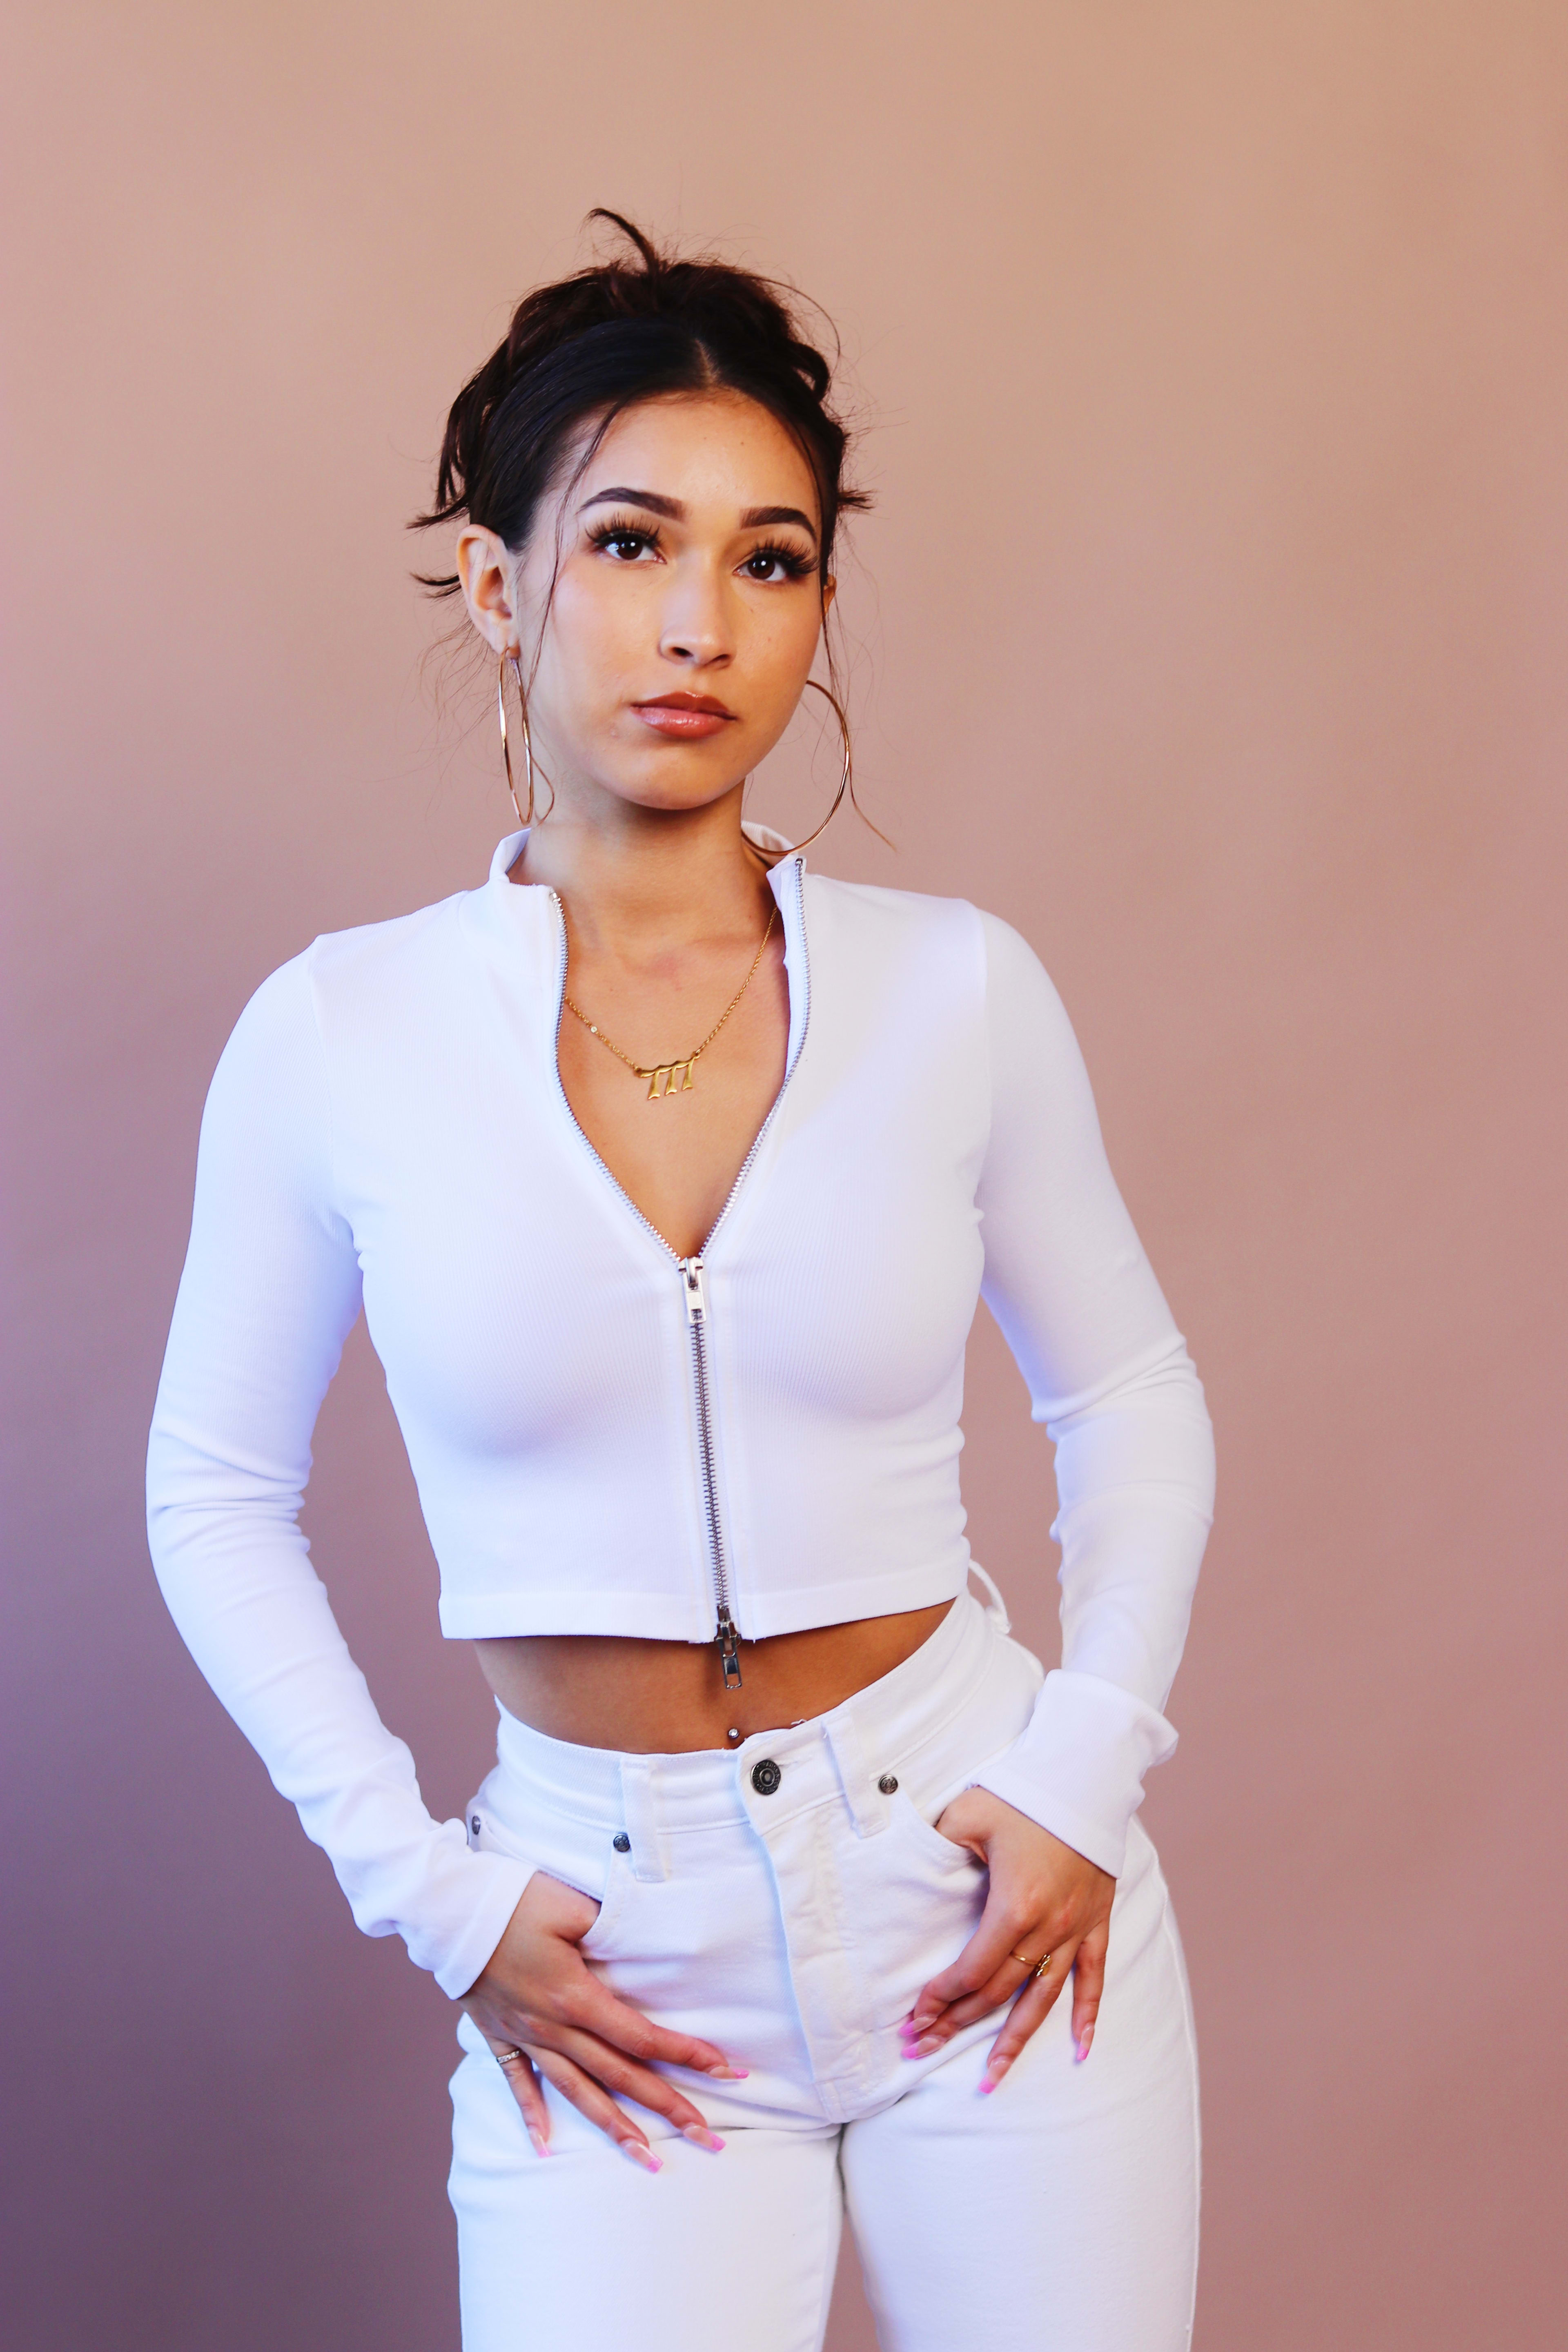 A fashion photoshoot with a woman in white.